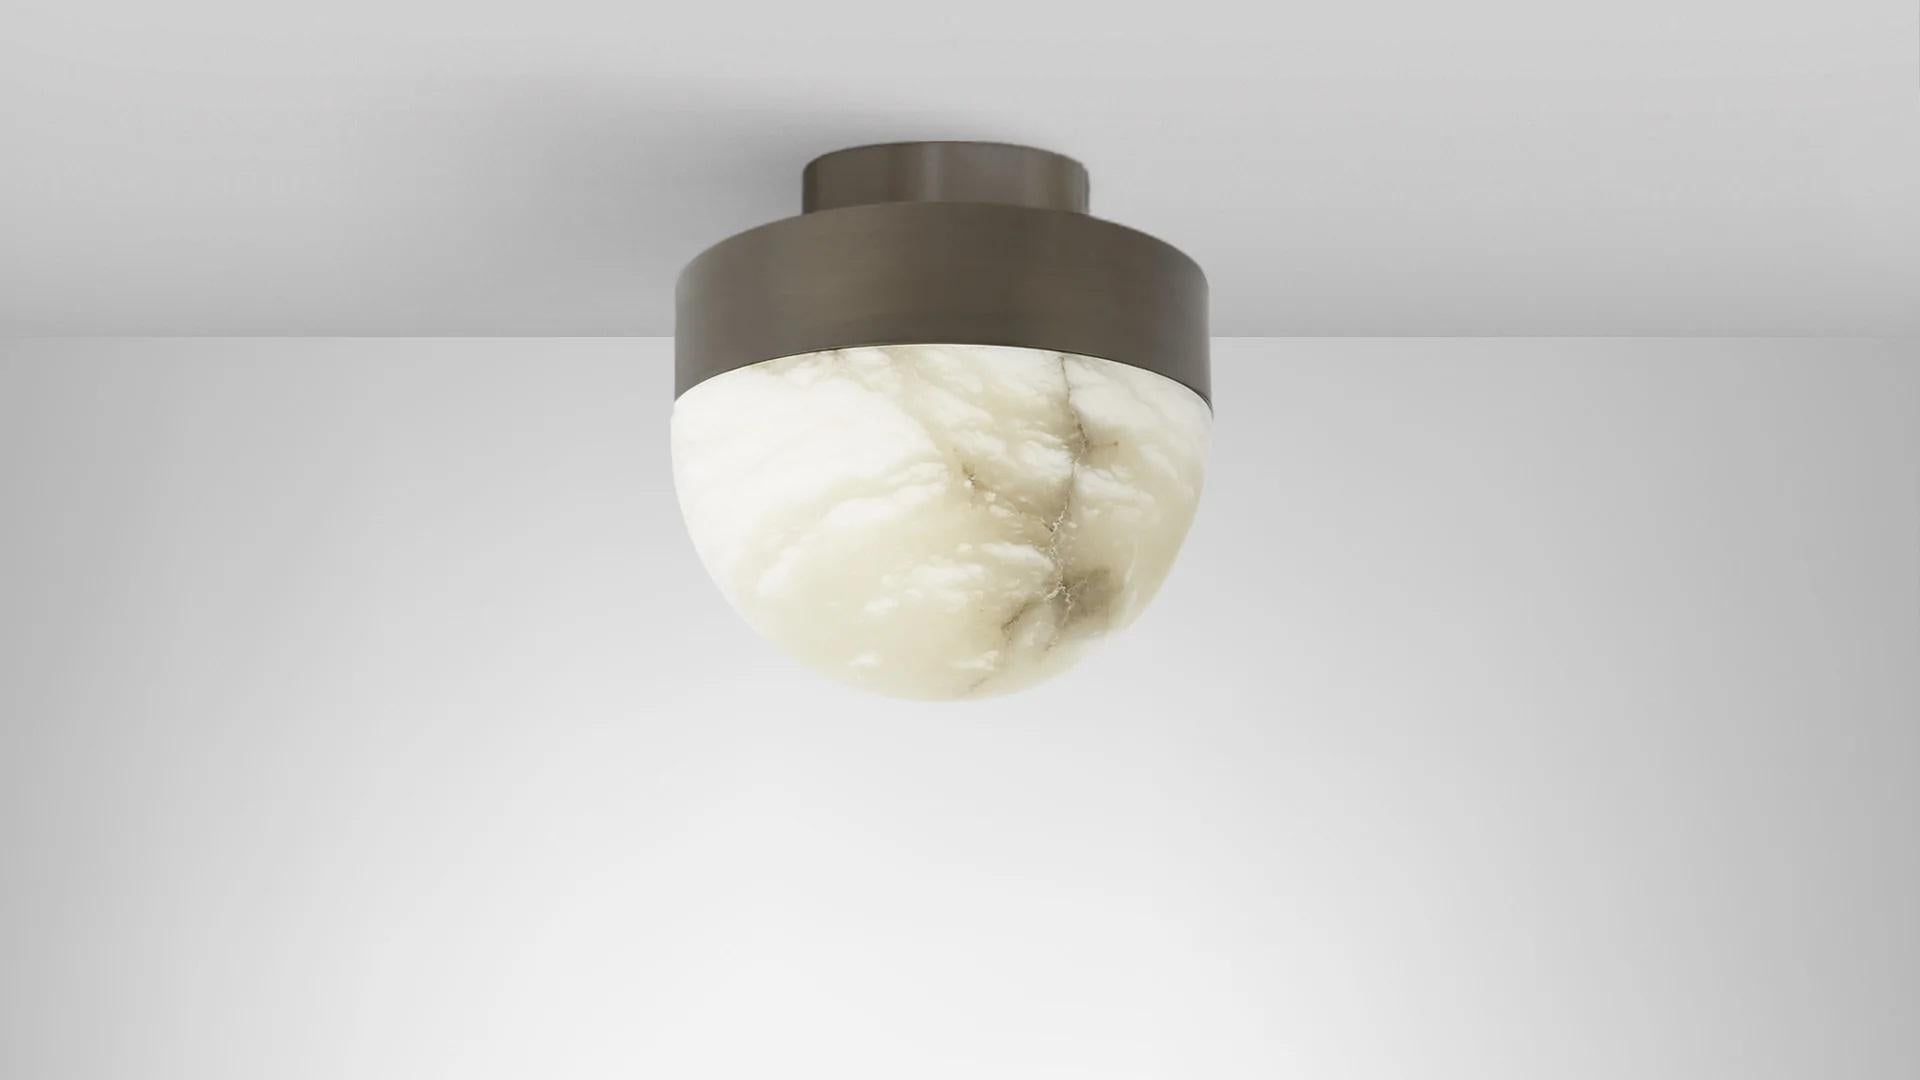 Lucid 300 flush lamp by CTO Lighting.
Materials: honed alabaster with satin brass base.
Also available in honed alabaster with bronze base.
Dimensions: H 28 x W 30 cm

All our lamps can be wired according to each country. If sold to the USA it